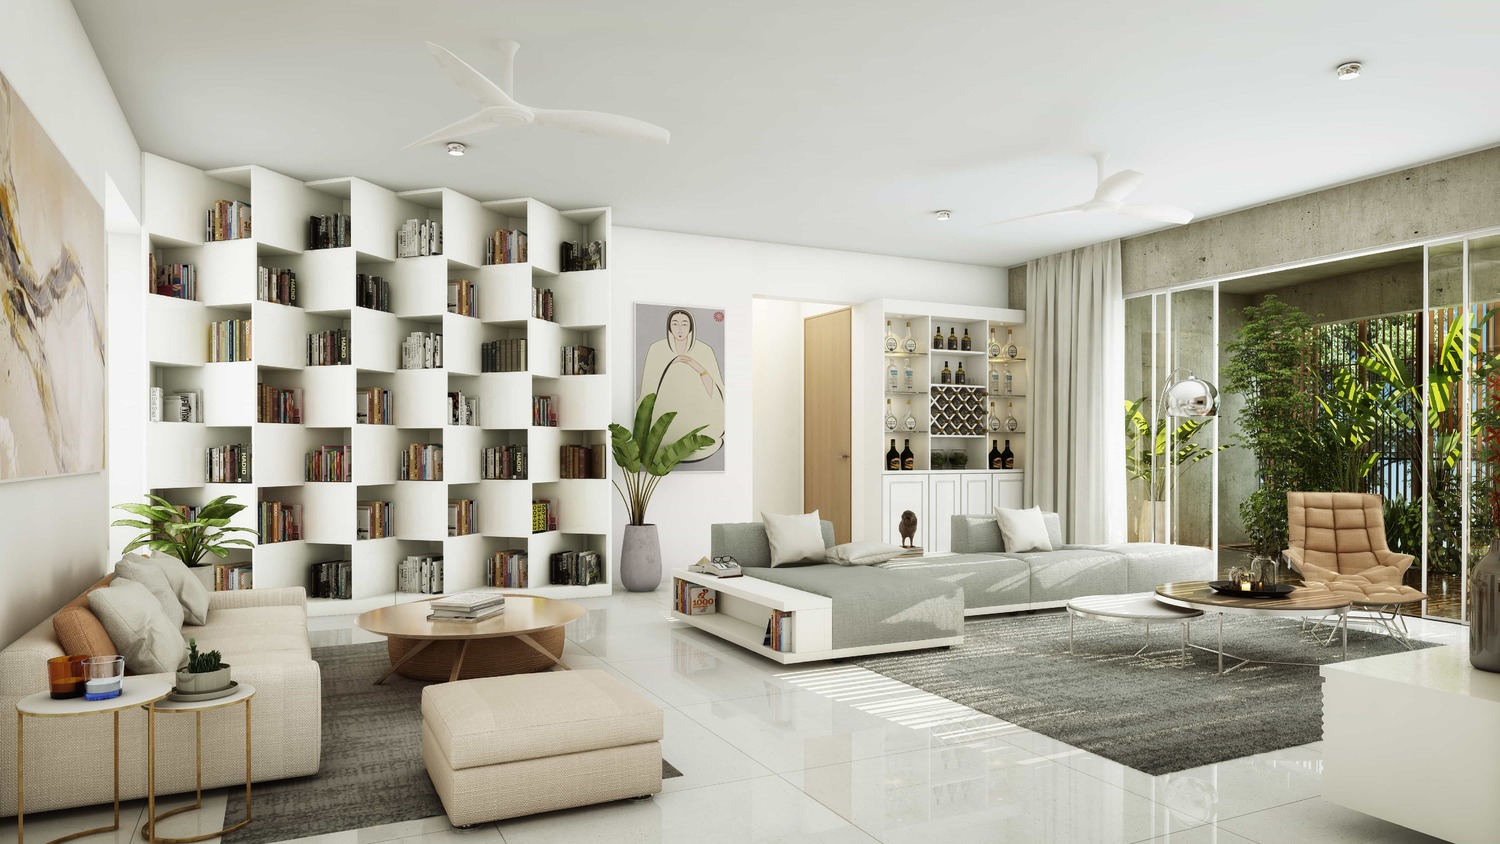 38&banyan-3bhk-house-for-sale-in-bangalore